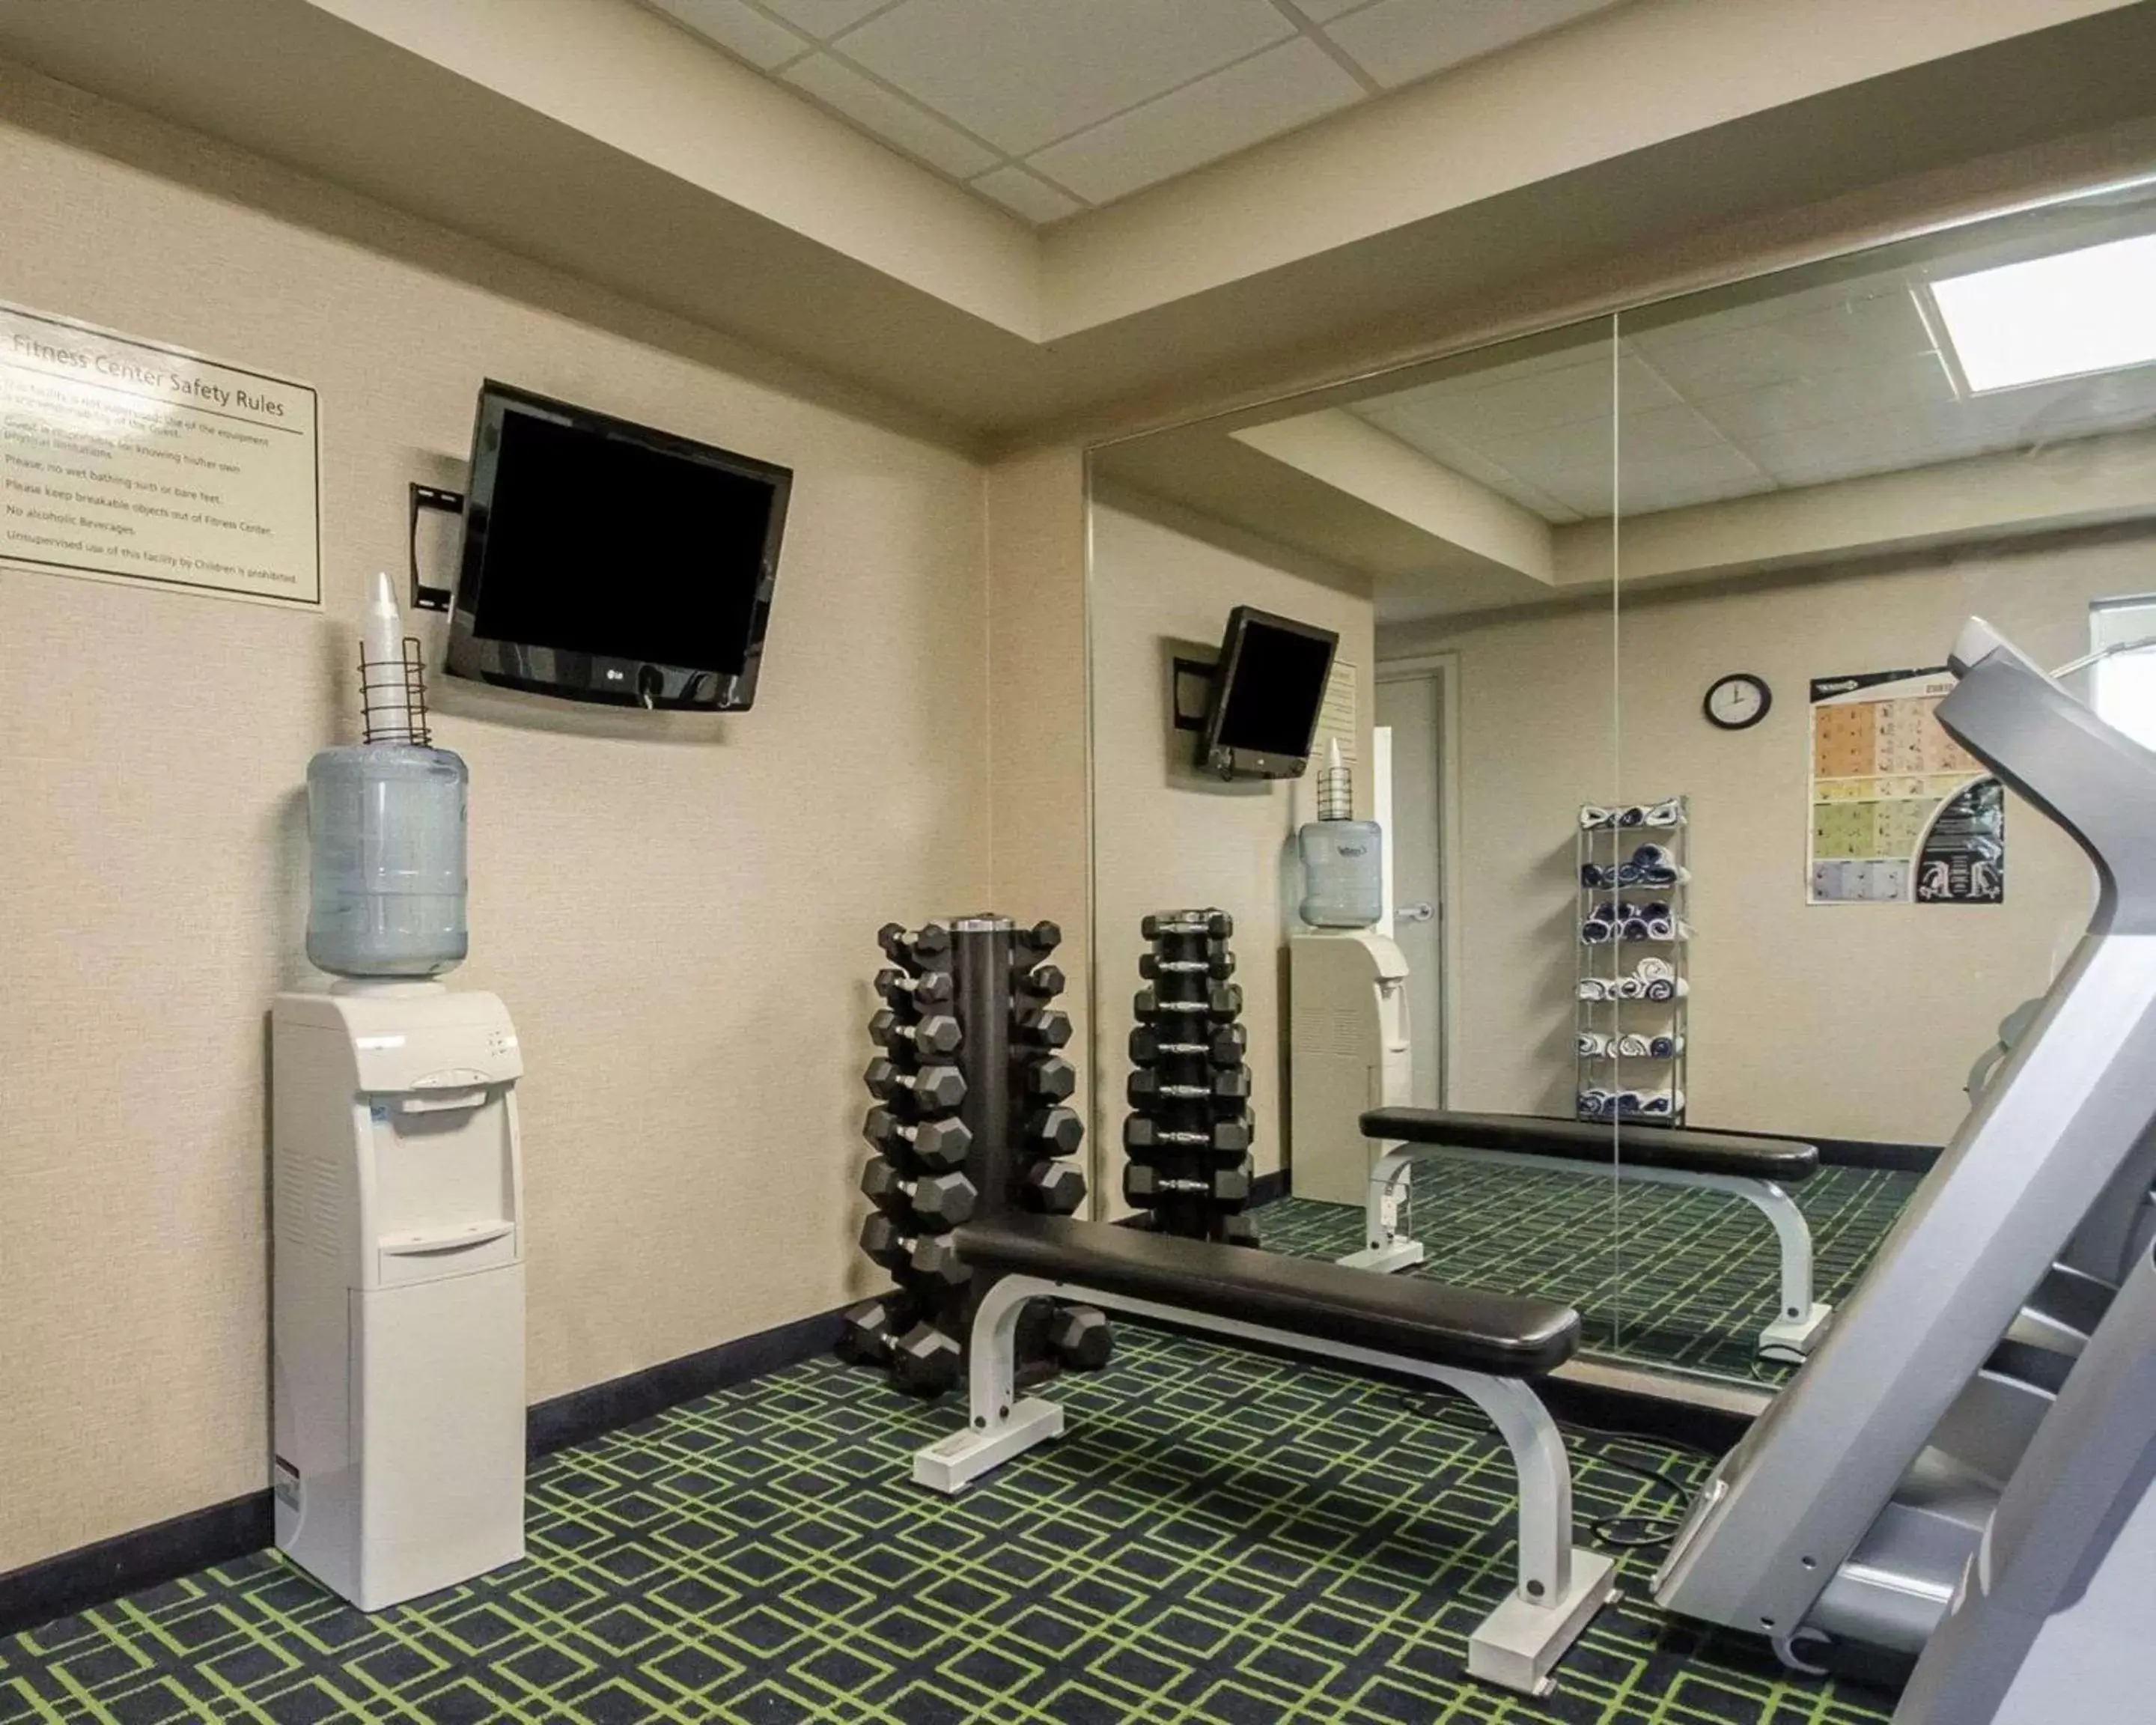 Fitness centre/facilities, Fitness Center/Facilities in Clarion Pointe by Choice Hotels Corydon